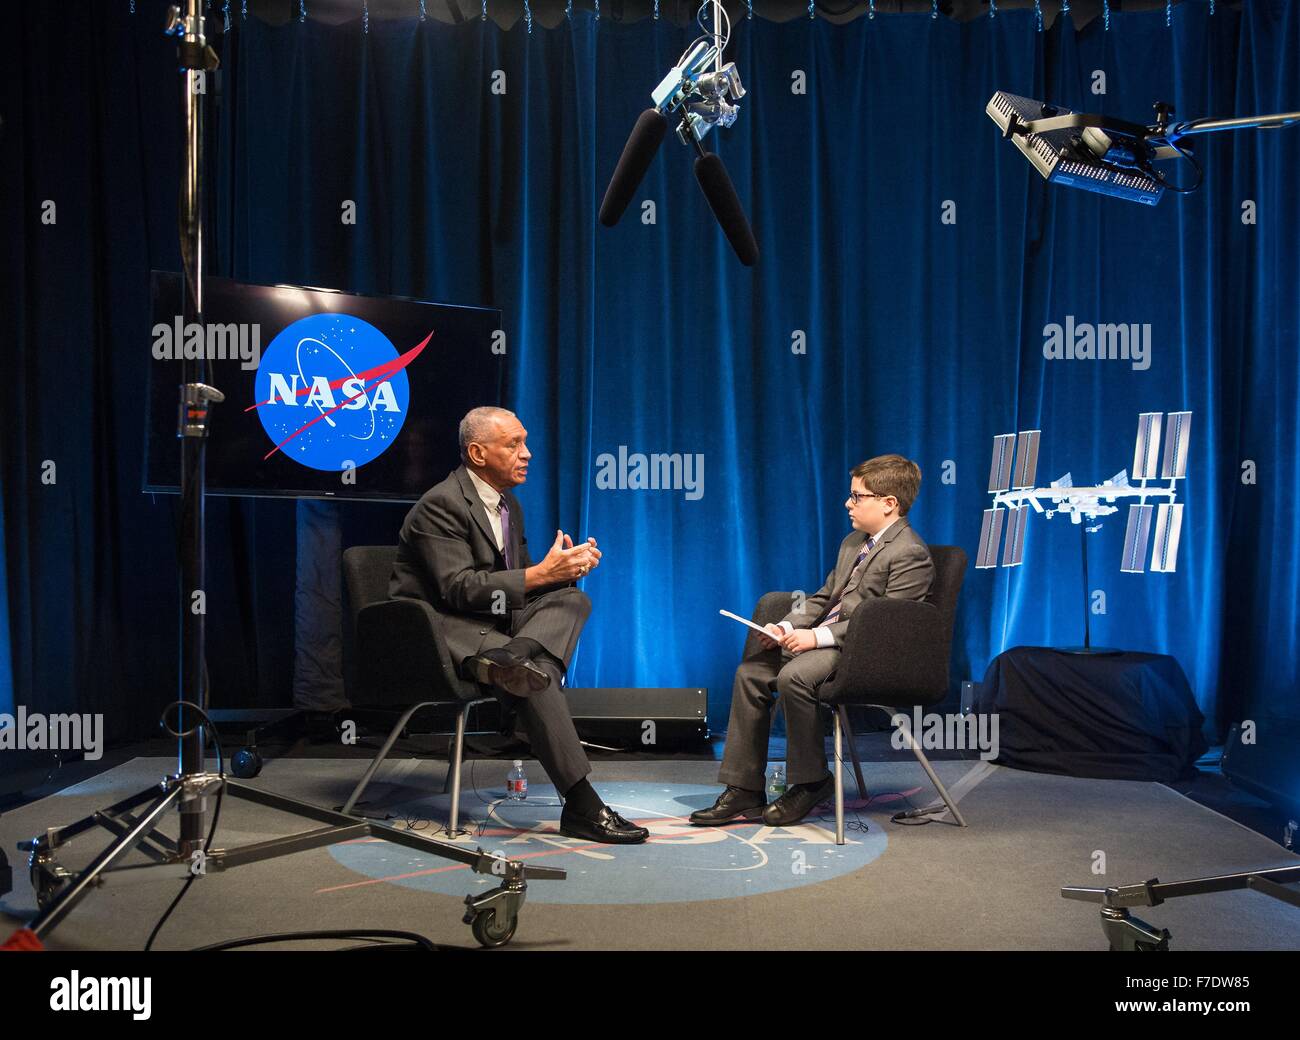 NASA Administrator Charles Bolden is interviewed by nine-year old Max from Humans of New York at NASA Headquarters November 23, 2015 in Washington, DC. Max was featured on the HONY Facebook page on Nov. 14 stating he'd like to be a reporter like his dad, 'I'd start by going to the Director of NASA. Then I'd ask him about his rockets. And if any of them were going to space. Stock Photo